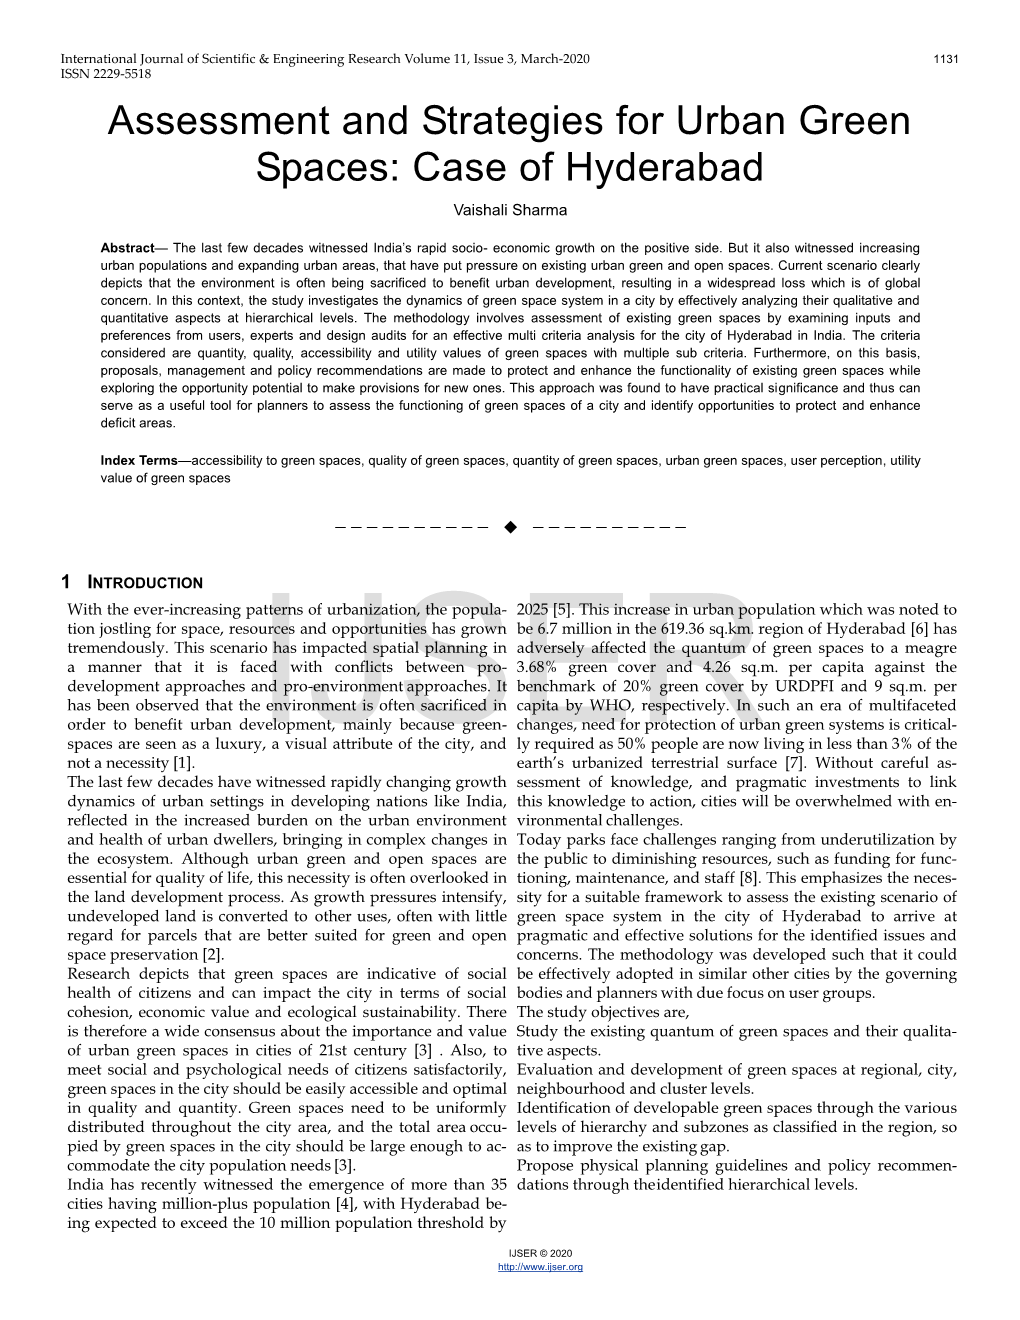 Assessment and Strategies for Urban Green Spaces: Case of Hyderabad Vaishali Sharma